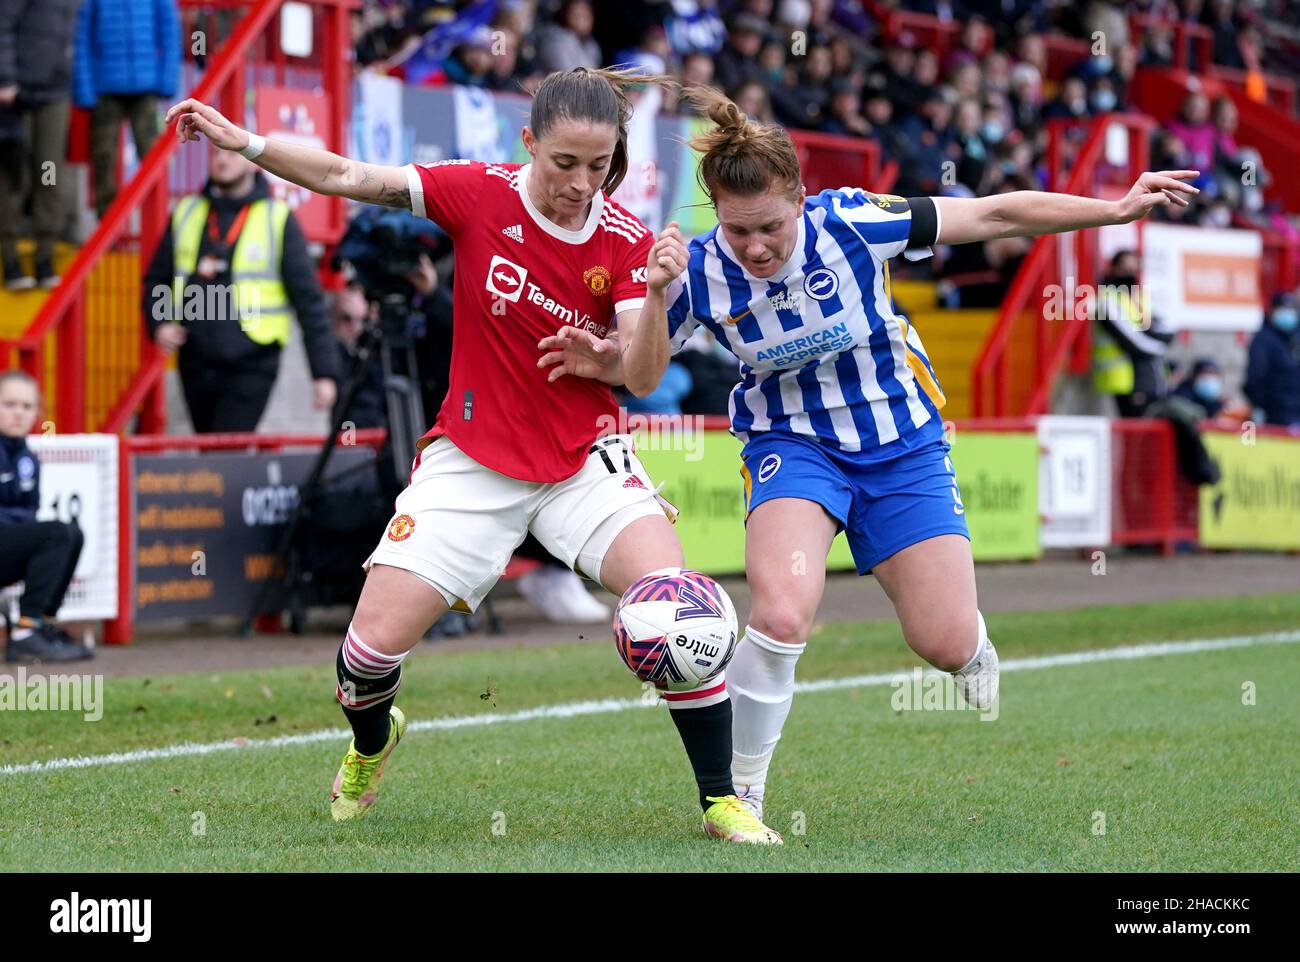 Manchester United's Ona Batlle (left) and Brighton and Hove Albion's Felicity Gibbons battle for the ball during the Barclays FA Women's Super League match at The People's Pension Stadium, Brighton. Picture date: Sunday December 12, 2021. Stock Photo